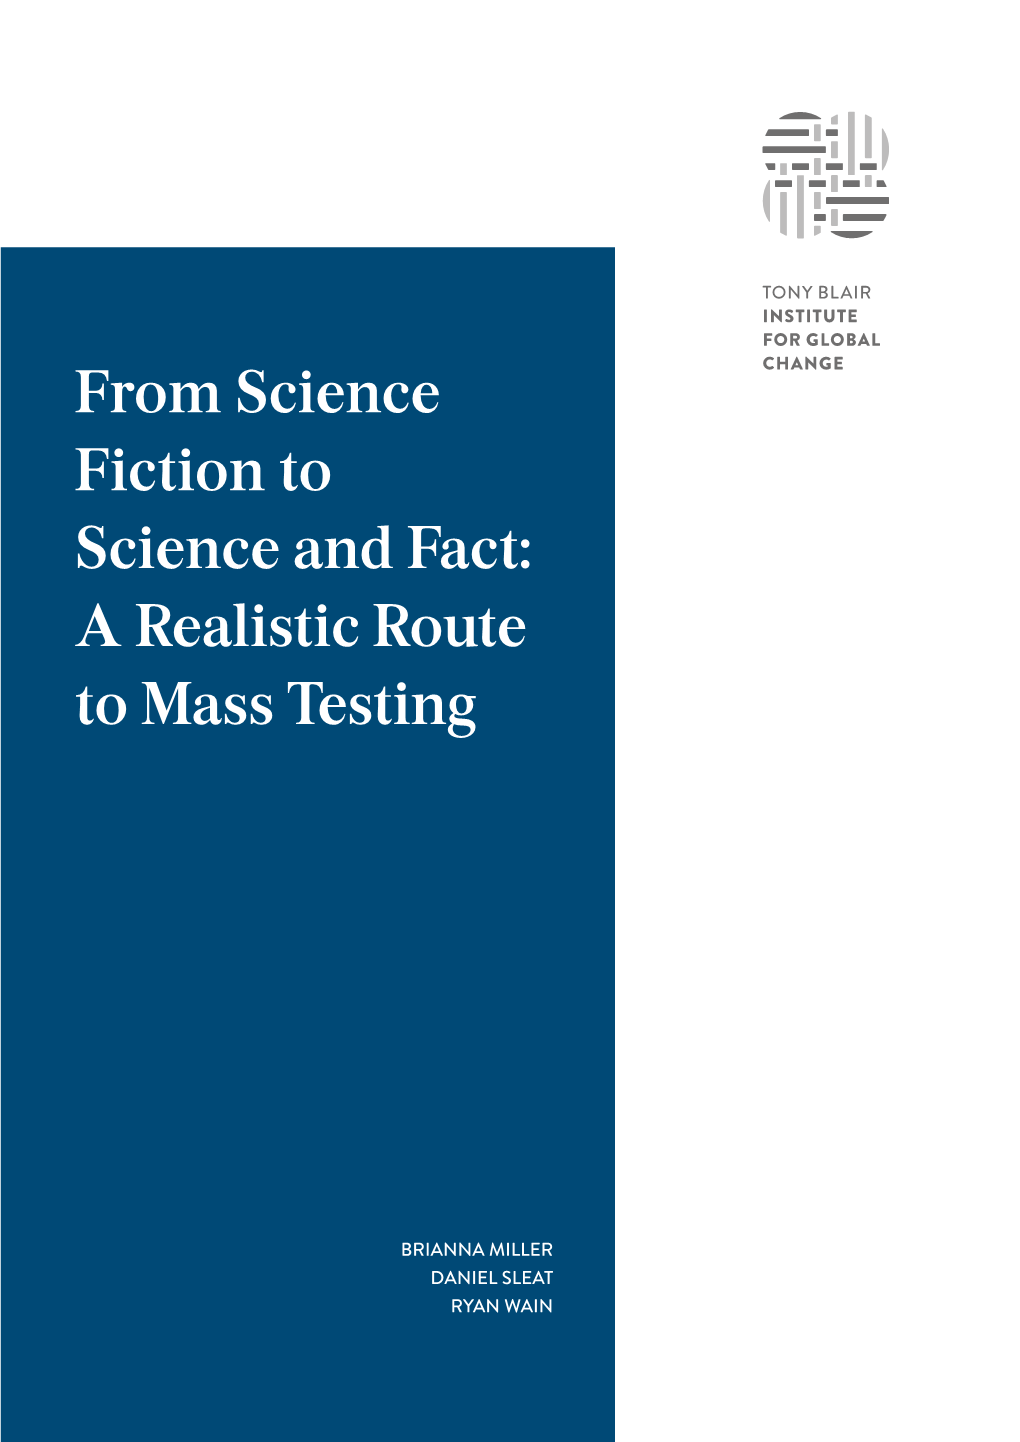 A Realistic Route to Mass Testing | Institute for Global Change